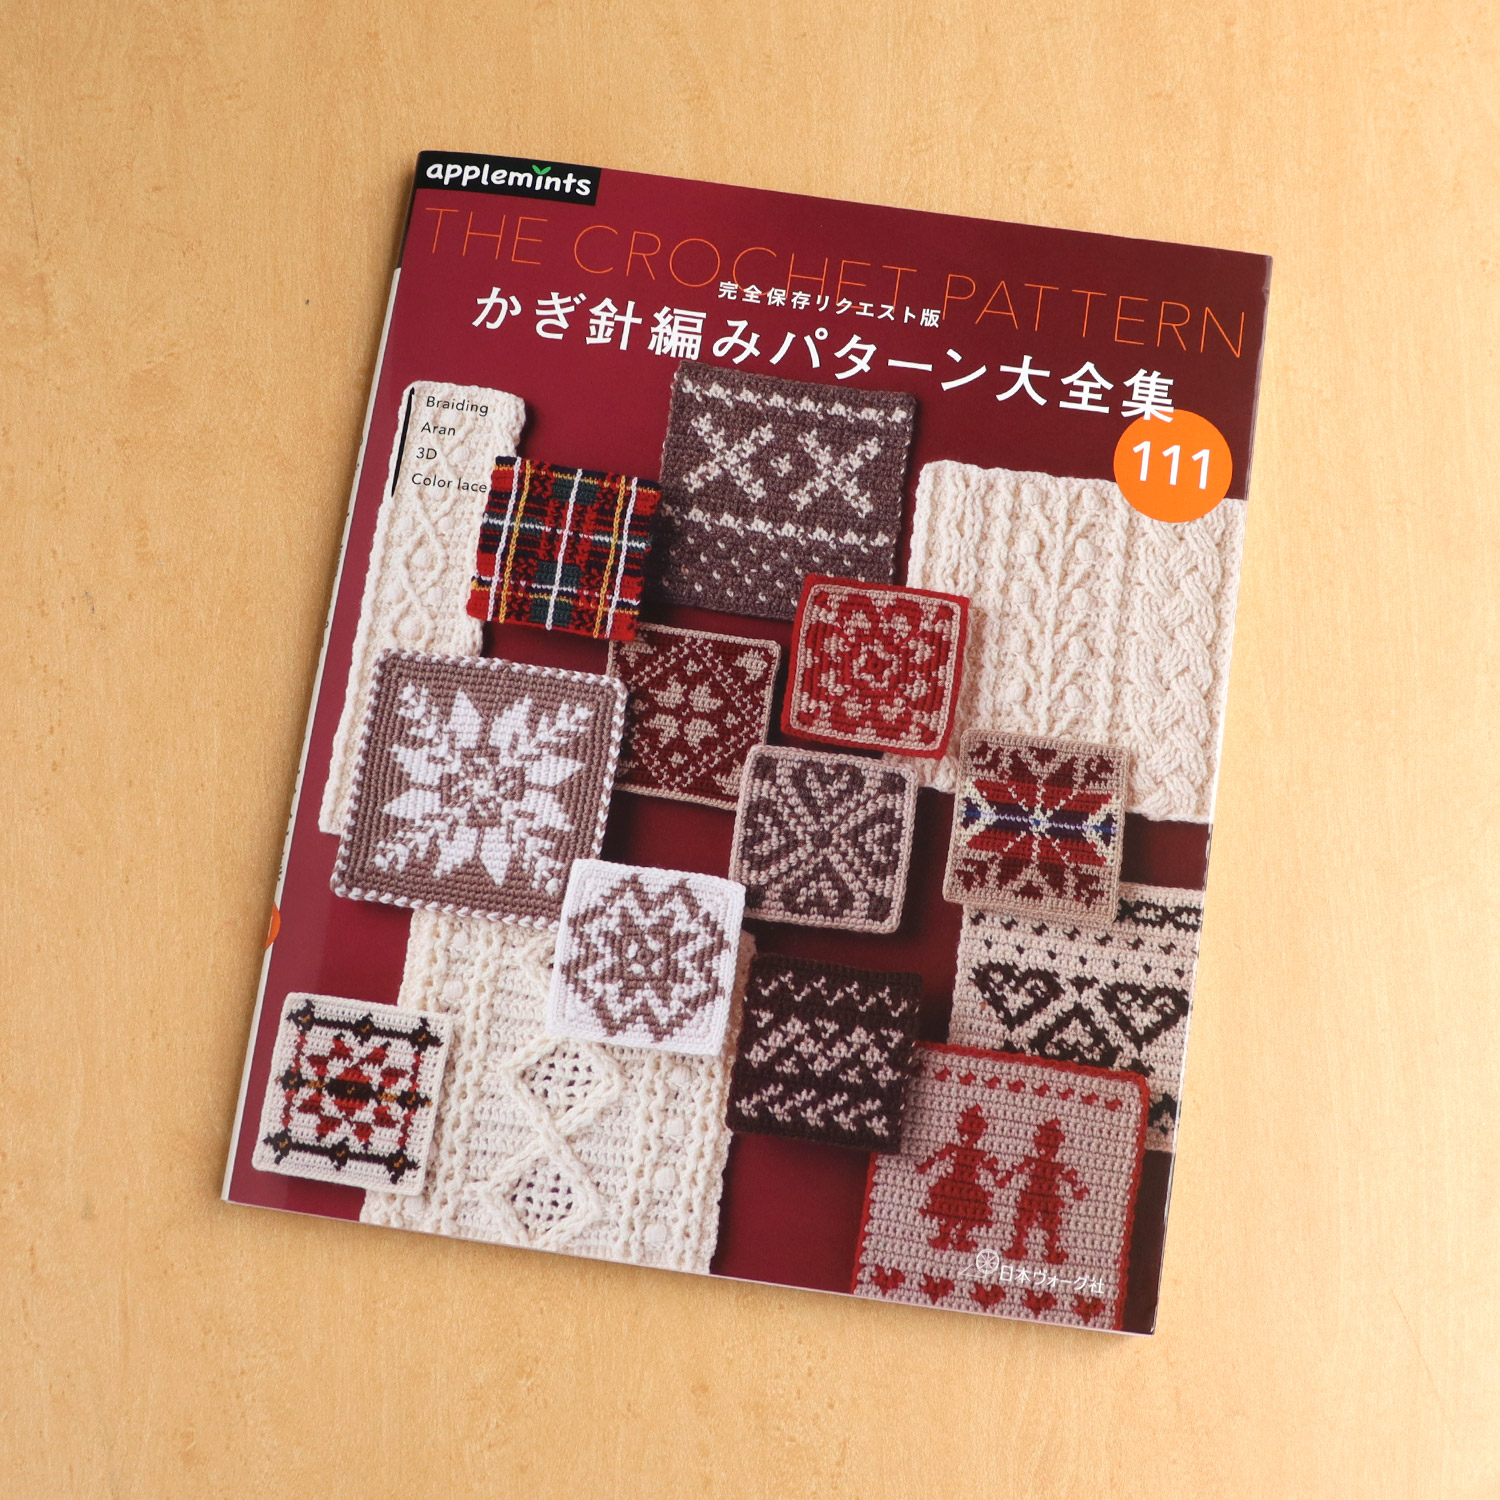 NV72179 Complete Collection of Crochet Patterns(book)